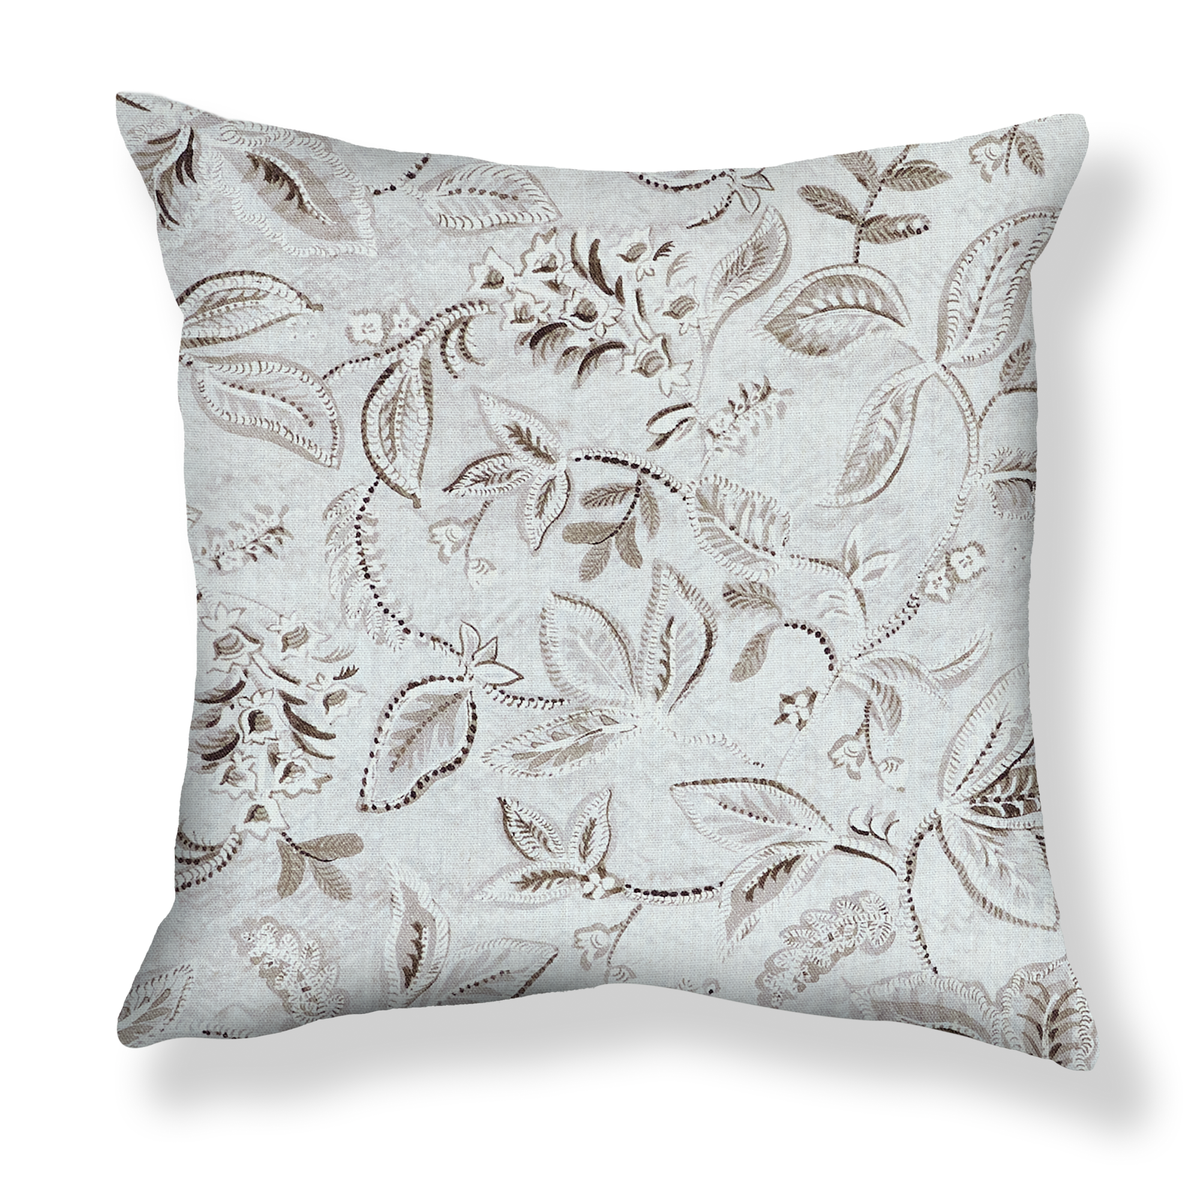 Textured Botanical Pillow in Gray